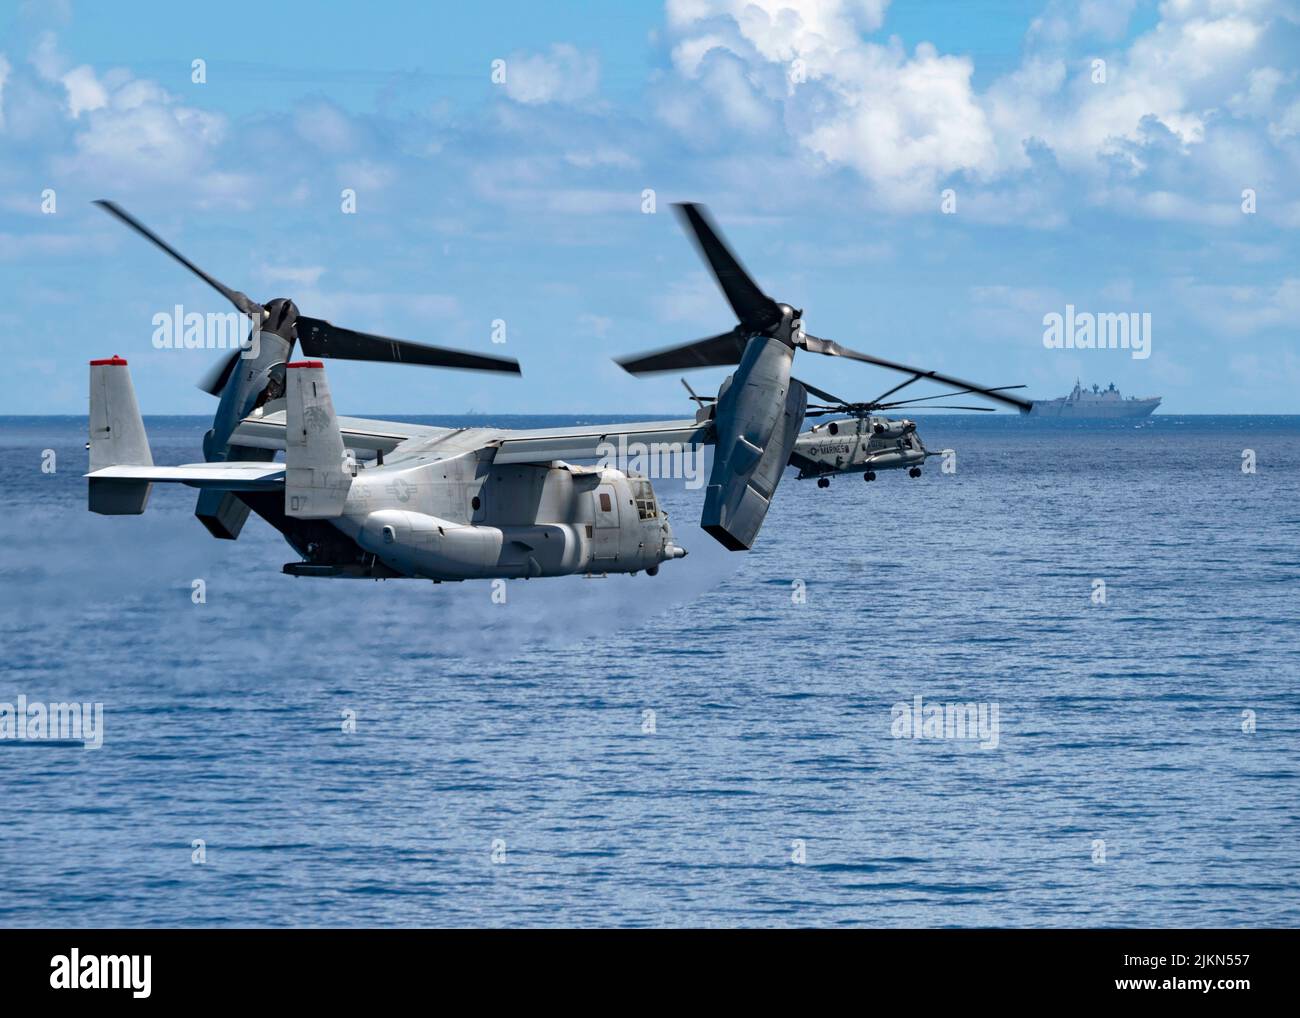 PACIFIC OCEAN (July 29, 2022) A U.S. Marine Corps MV-22B Osprey, attached to Marine Medium Tiltrotor Squadron (VMM) 363, left, and a U.S. Marine Corps UH-1Y Huey, attached to Marine Light Attack Helicopter Squadron (HMLA) 169, conducts flight operations with Royal Australian Navy Canberra-class landing helicopter dock HMAS Canberra (L02) during an amphibious raid as part of Rim of the Pacific (RIMPAC) 2022, July 29. Twenty-six nations, 38 ships, three submarines, more than 170 aircraft and 25,000 personnel are participating in RIMPAC from June 29 to Aug. 4 in and around the Hawaiian Islands an Stock Photo